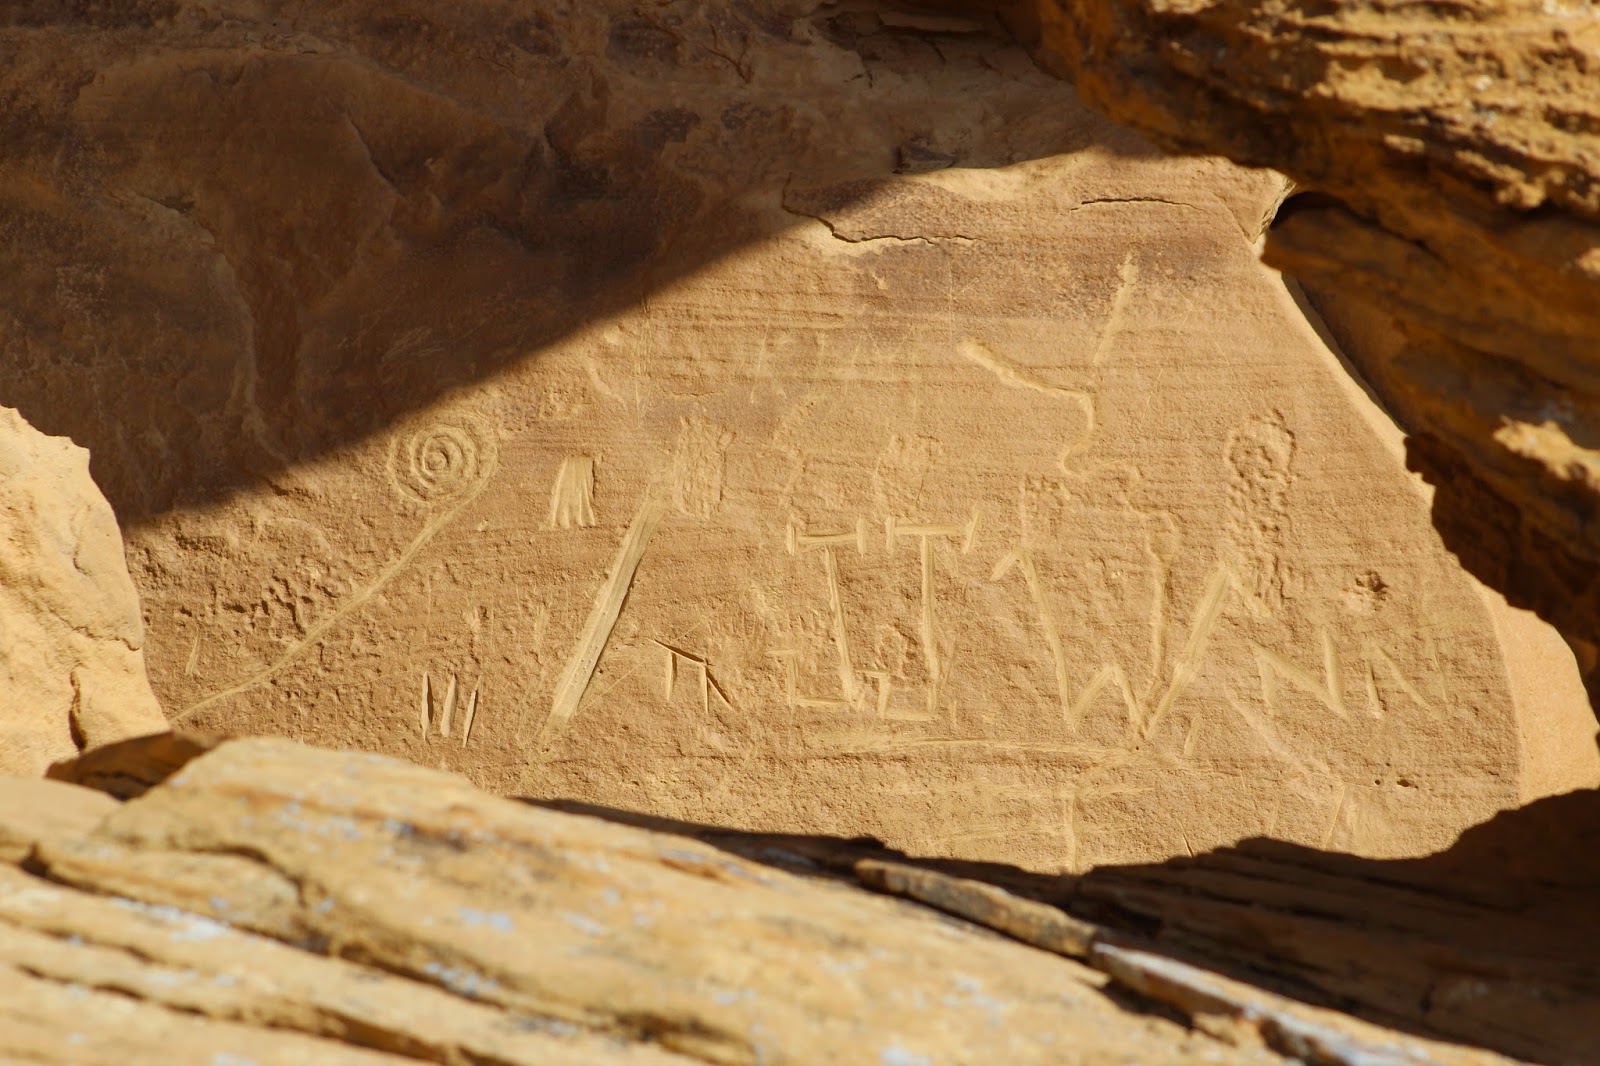 Rock art near the Gallo Cliff Dwelling, Chaco Culture National Historic Park, New Mexico